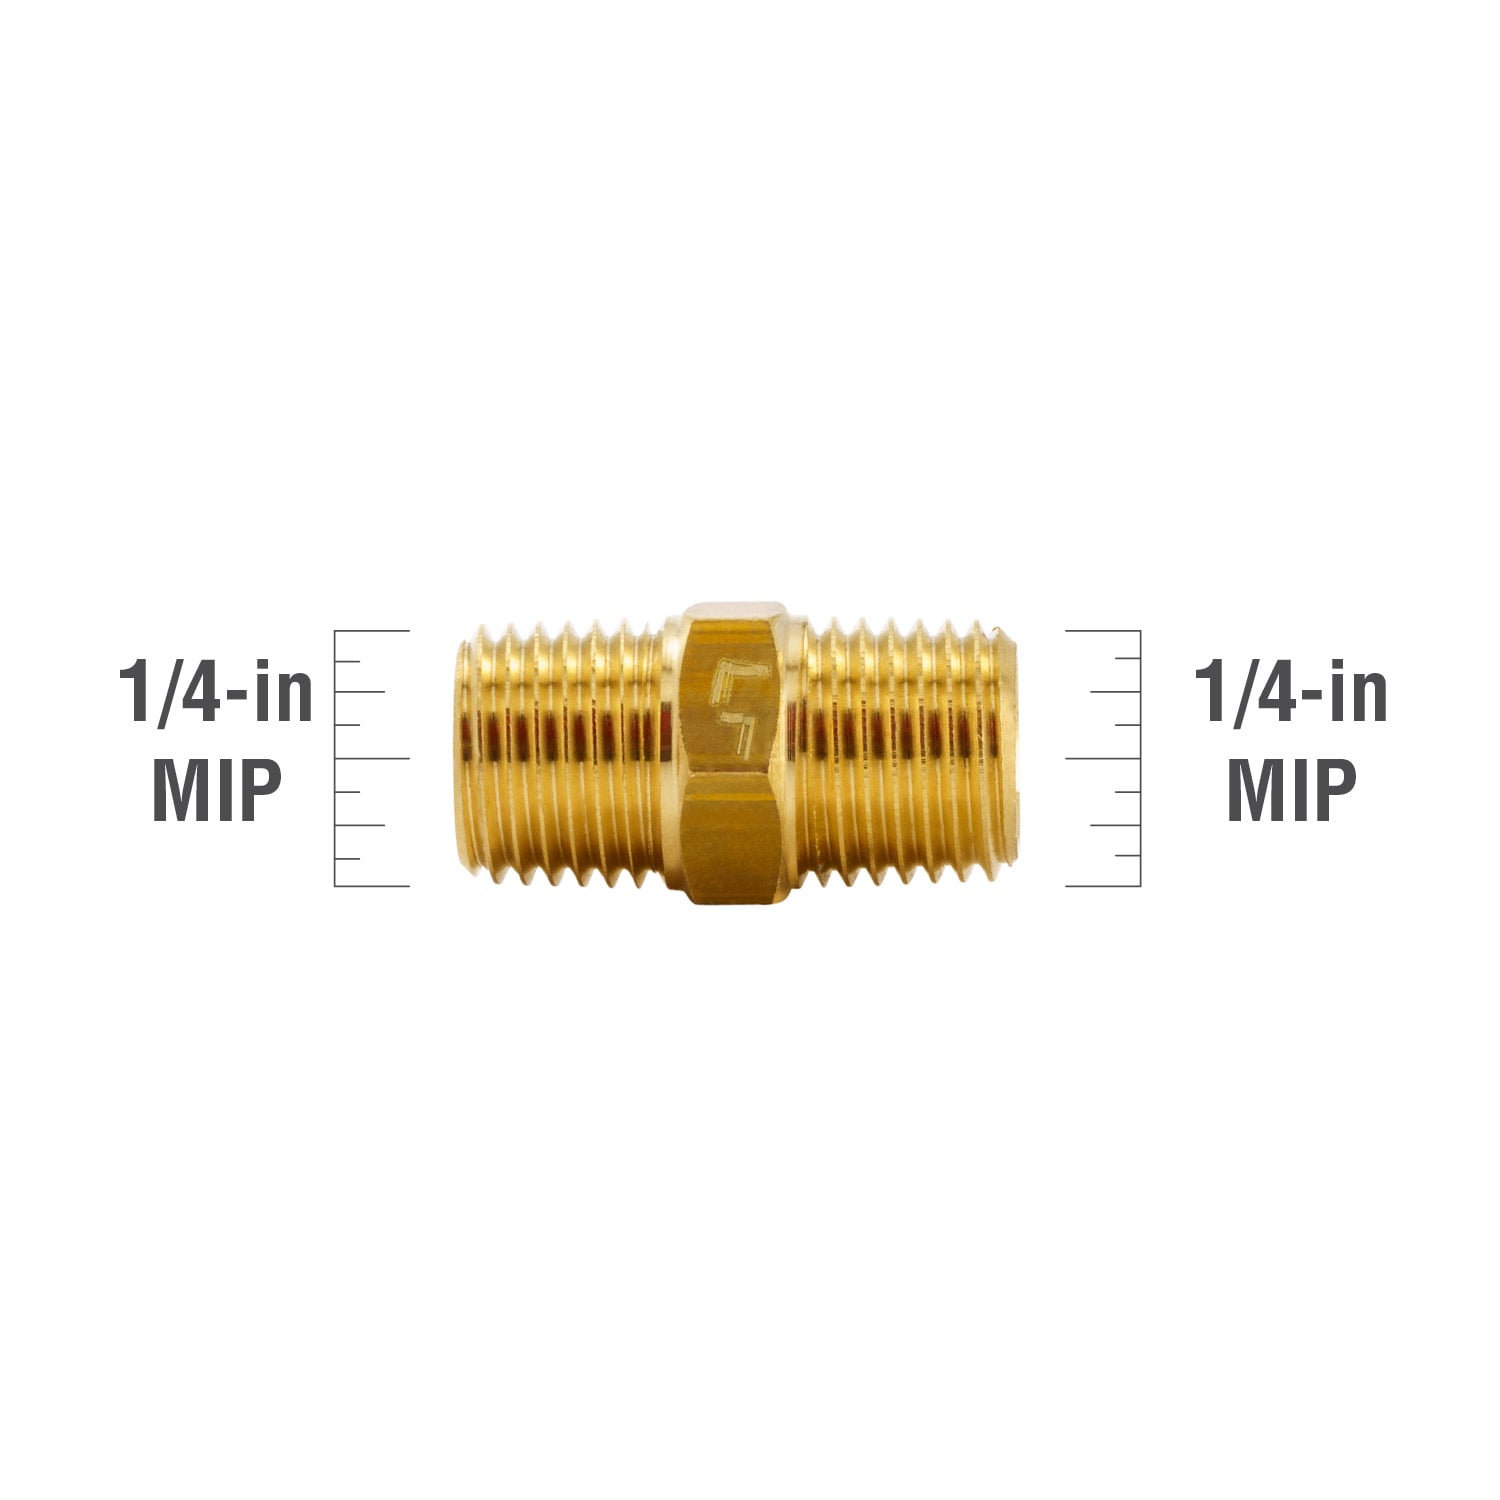 Proline Series 1-in x 1-in Threaded Male Adapter Nipple Fitting in